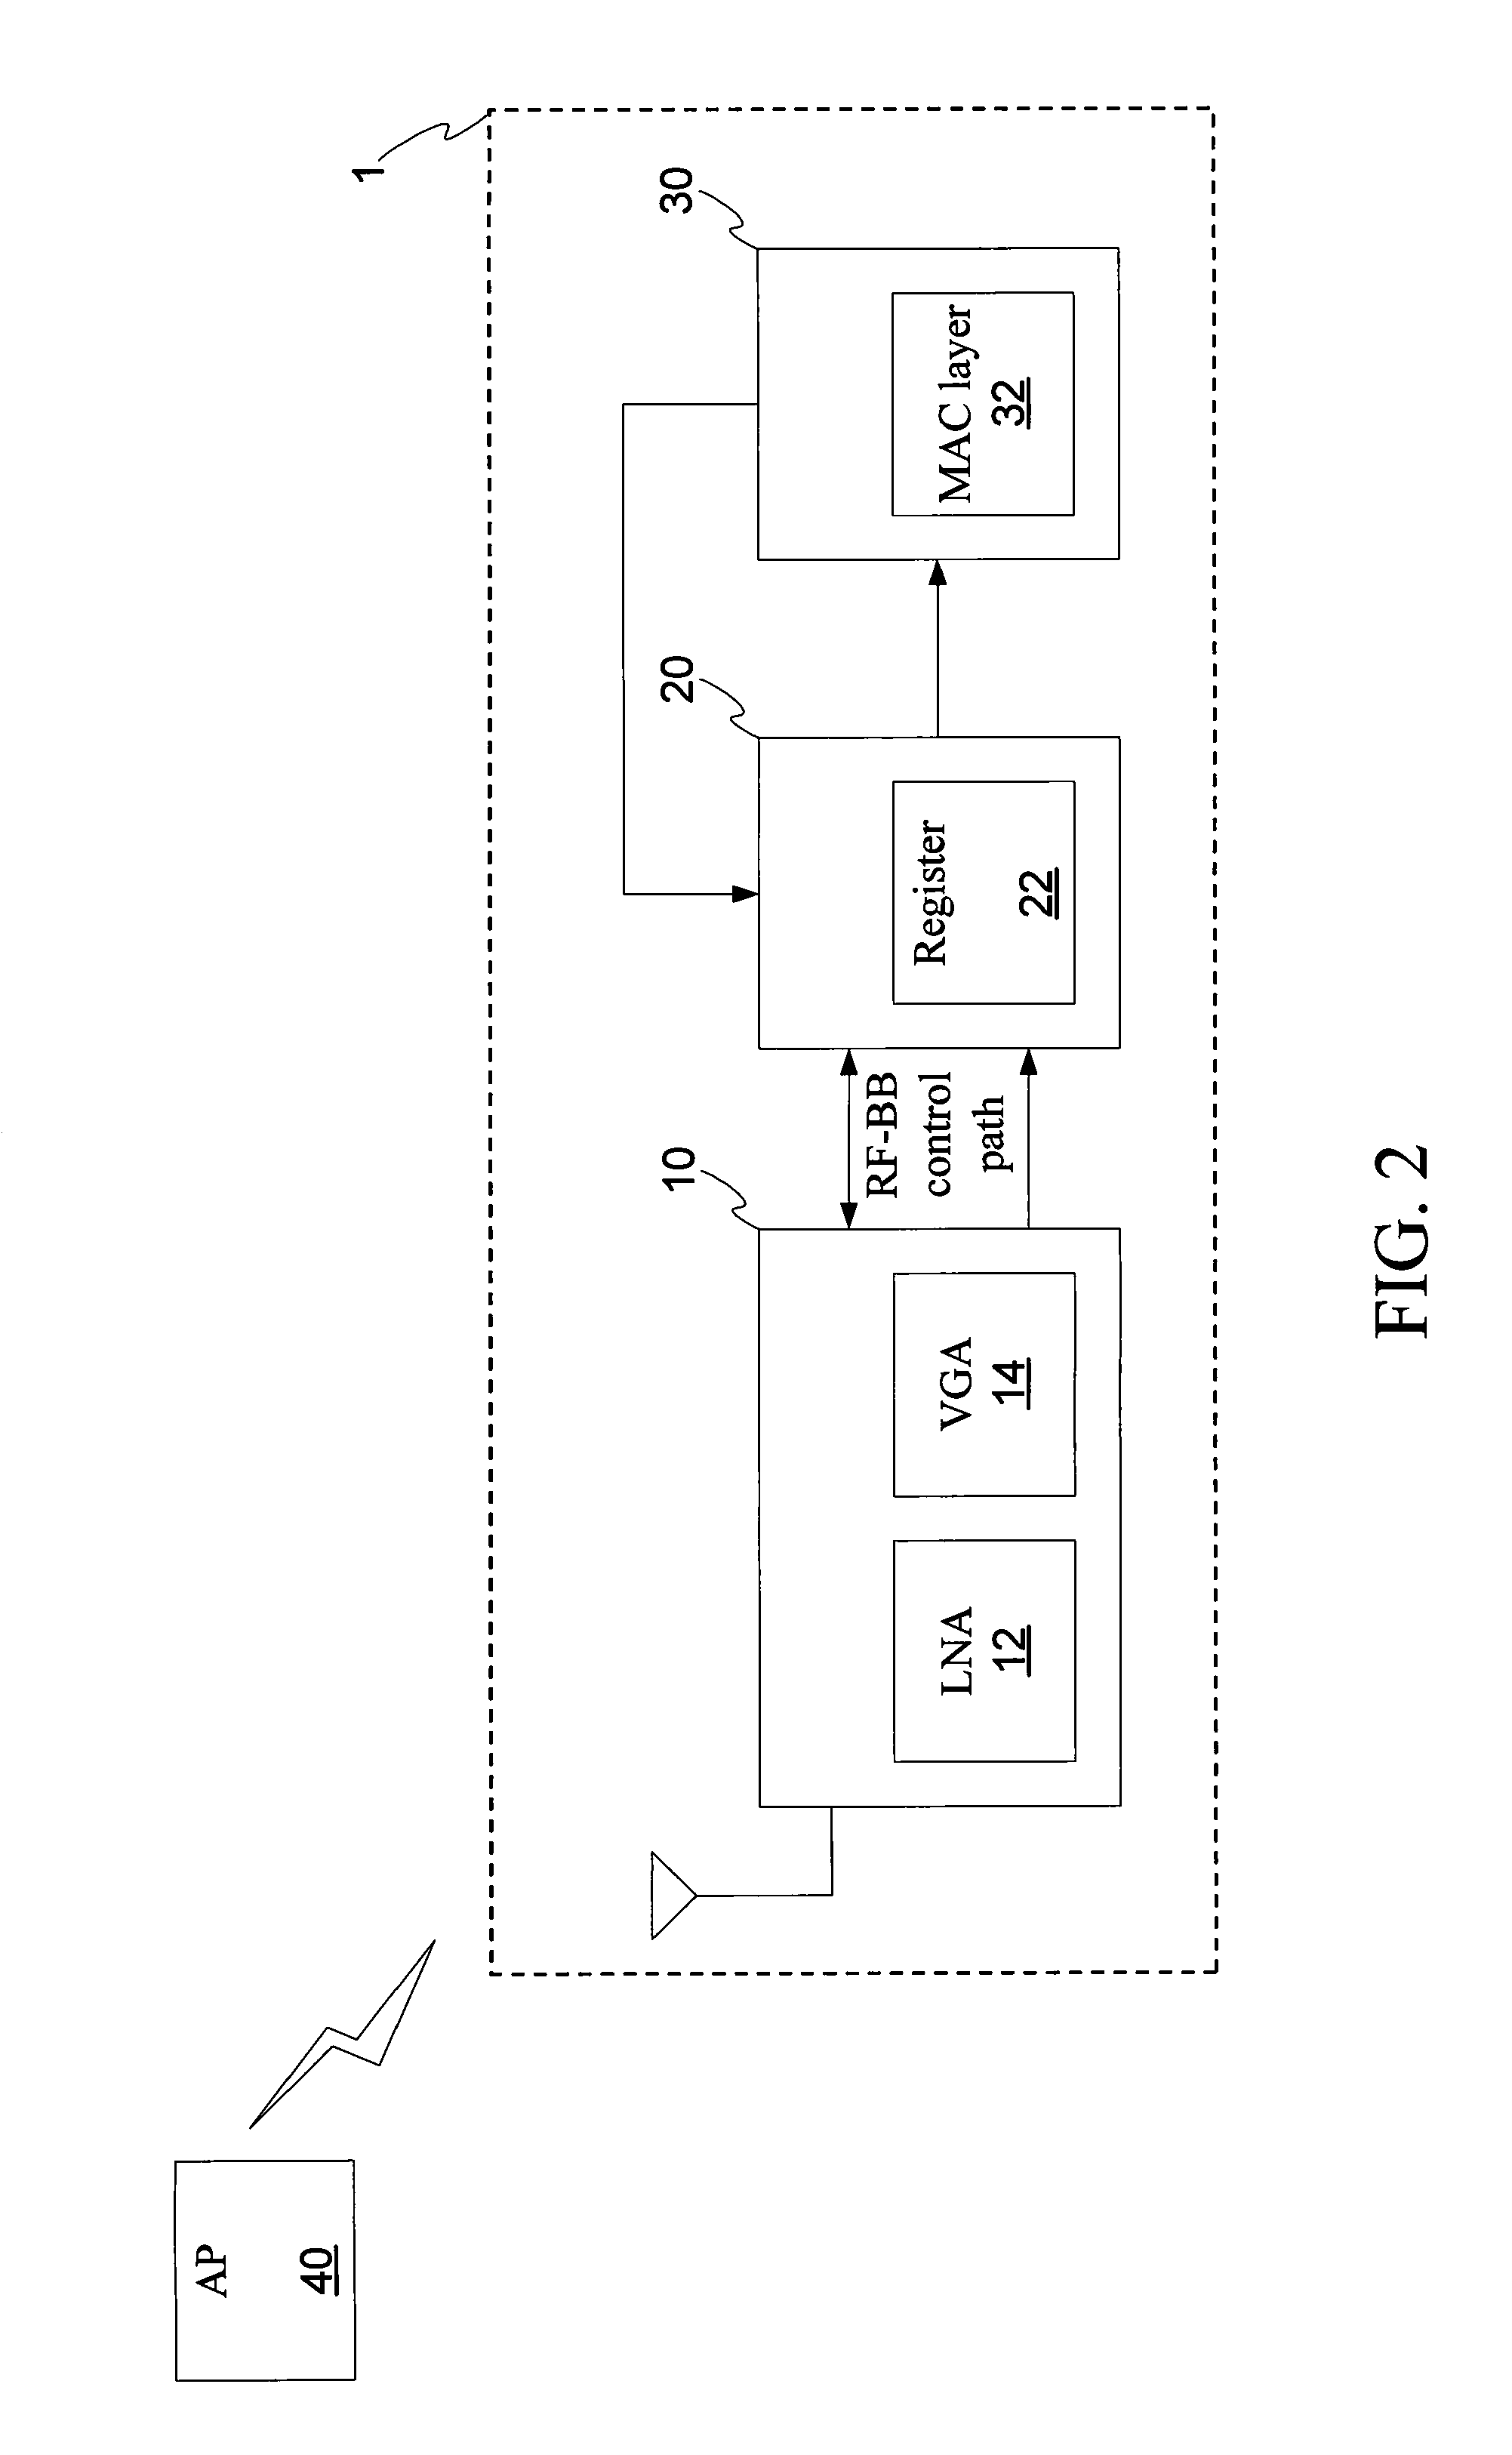 Wireless network connection device and method